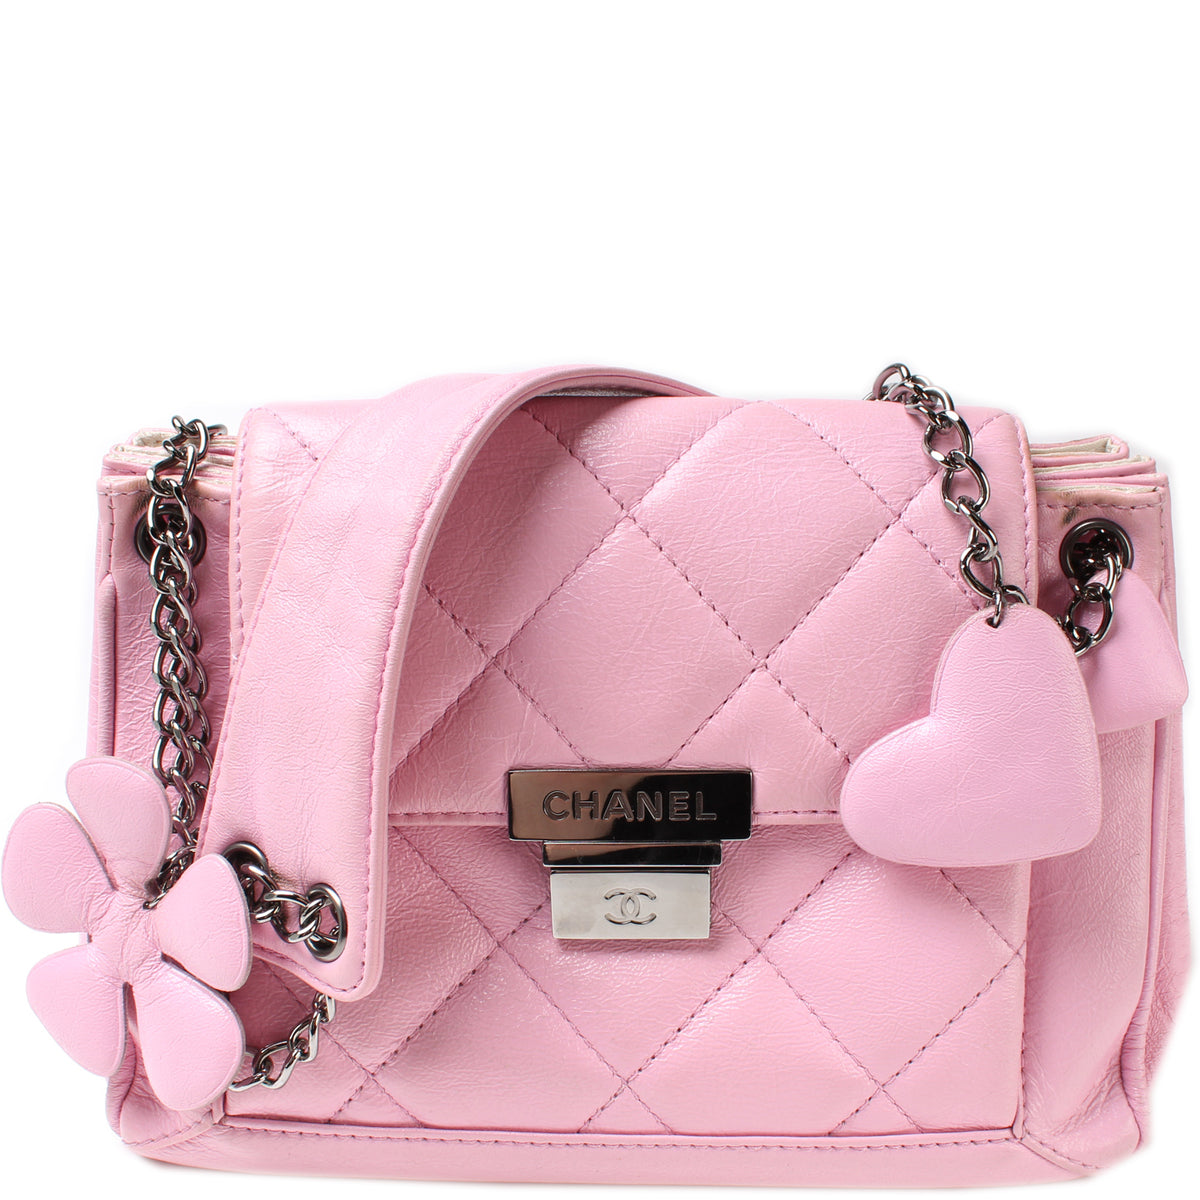 Gold Chain Prada Bag With Cute Pink Color Used No Noticeable Scratches Or  Stains